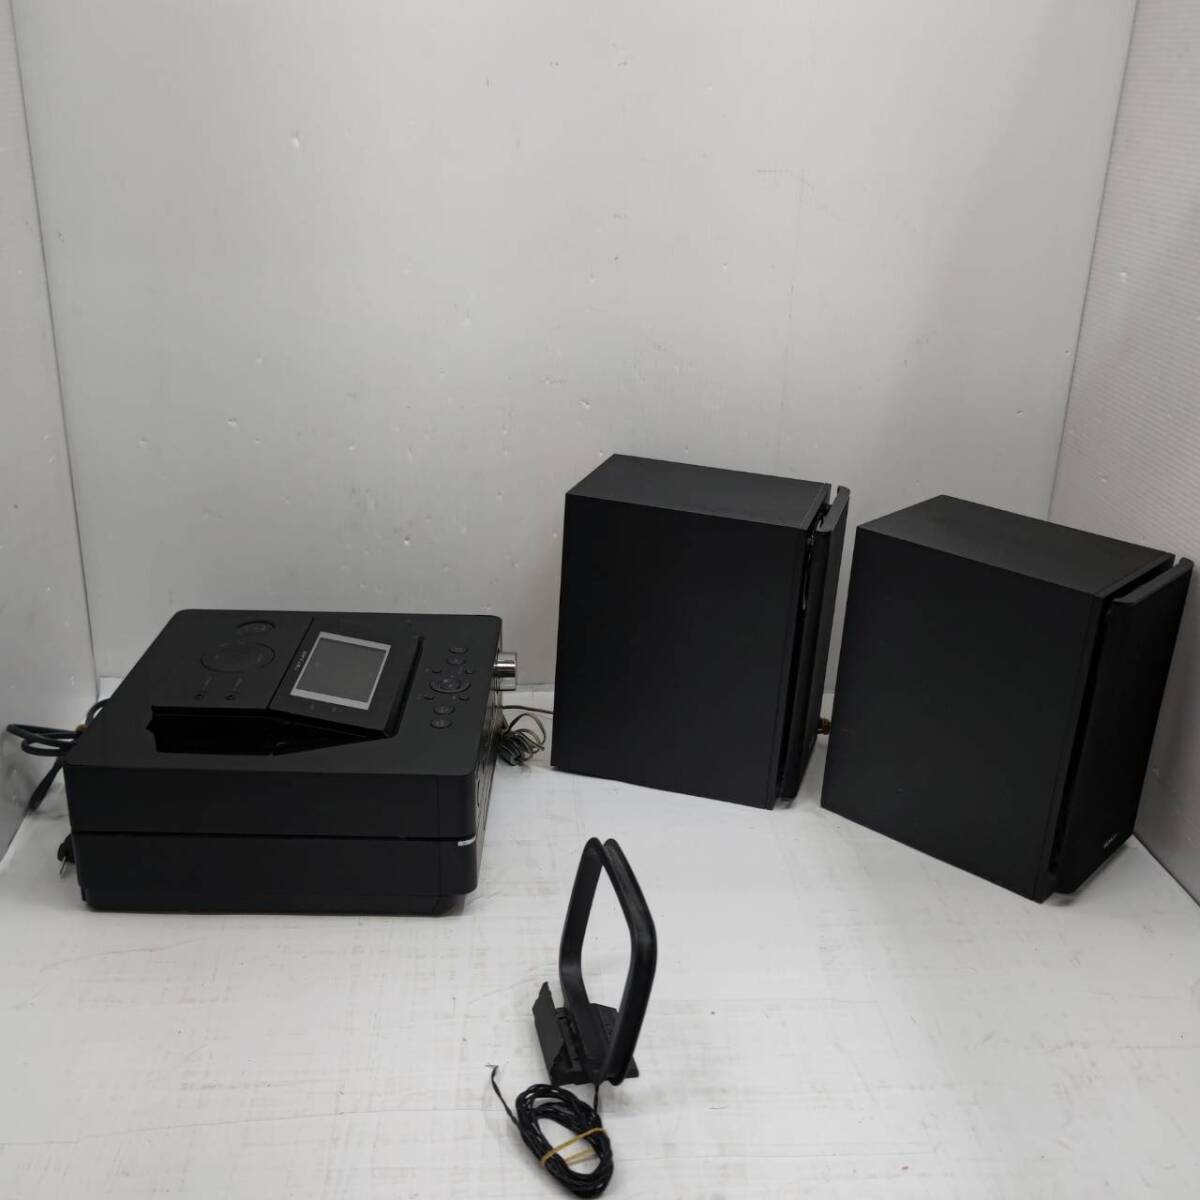  free shipping h59362 SONY HDD CD component stereo speaker system NAS-D55HD SS-D55HD parts parts taking . Junk 